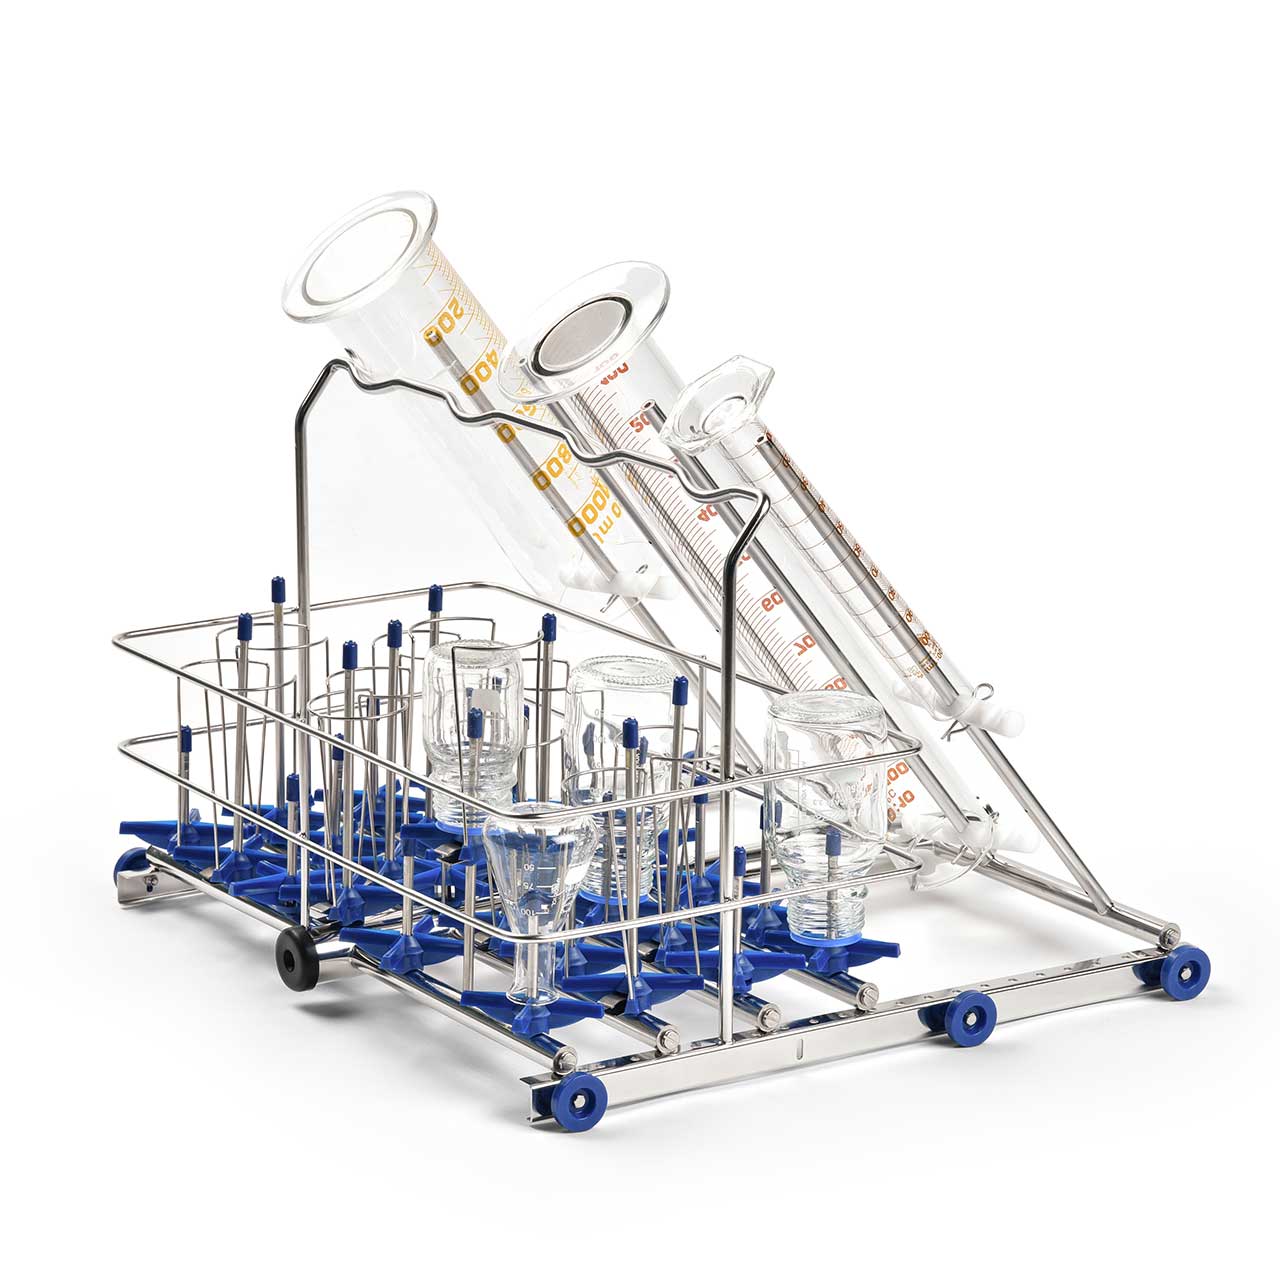 A mixed rack with cylinders and injectors as loading equipment for Getinge Lancer Ultima Laboratory Washer